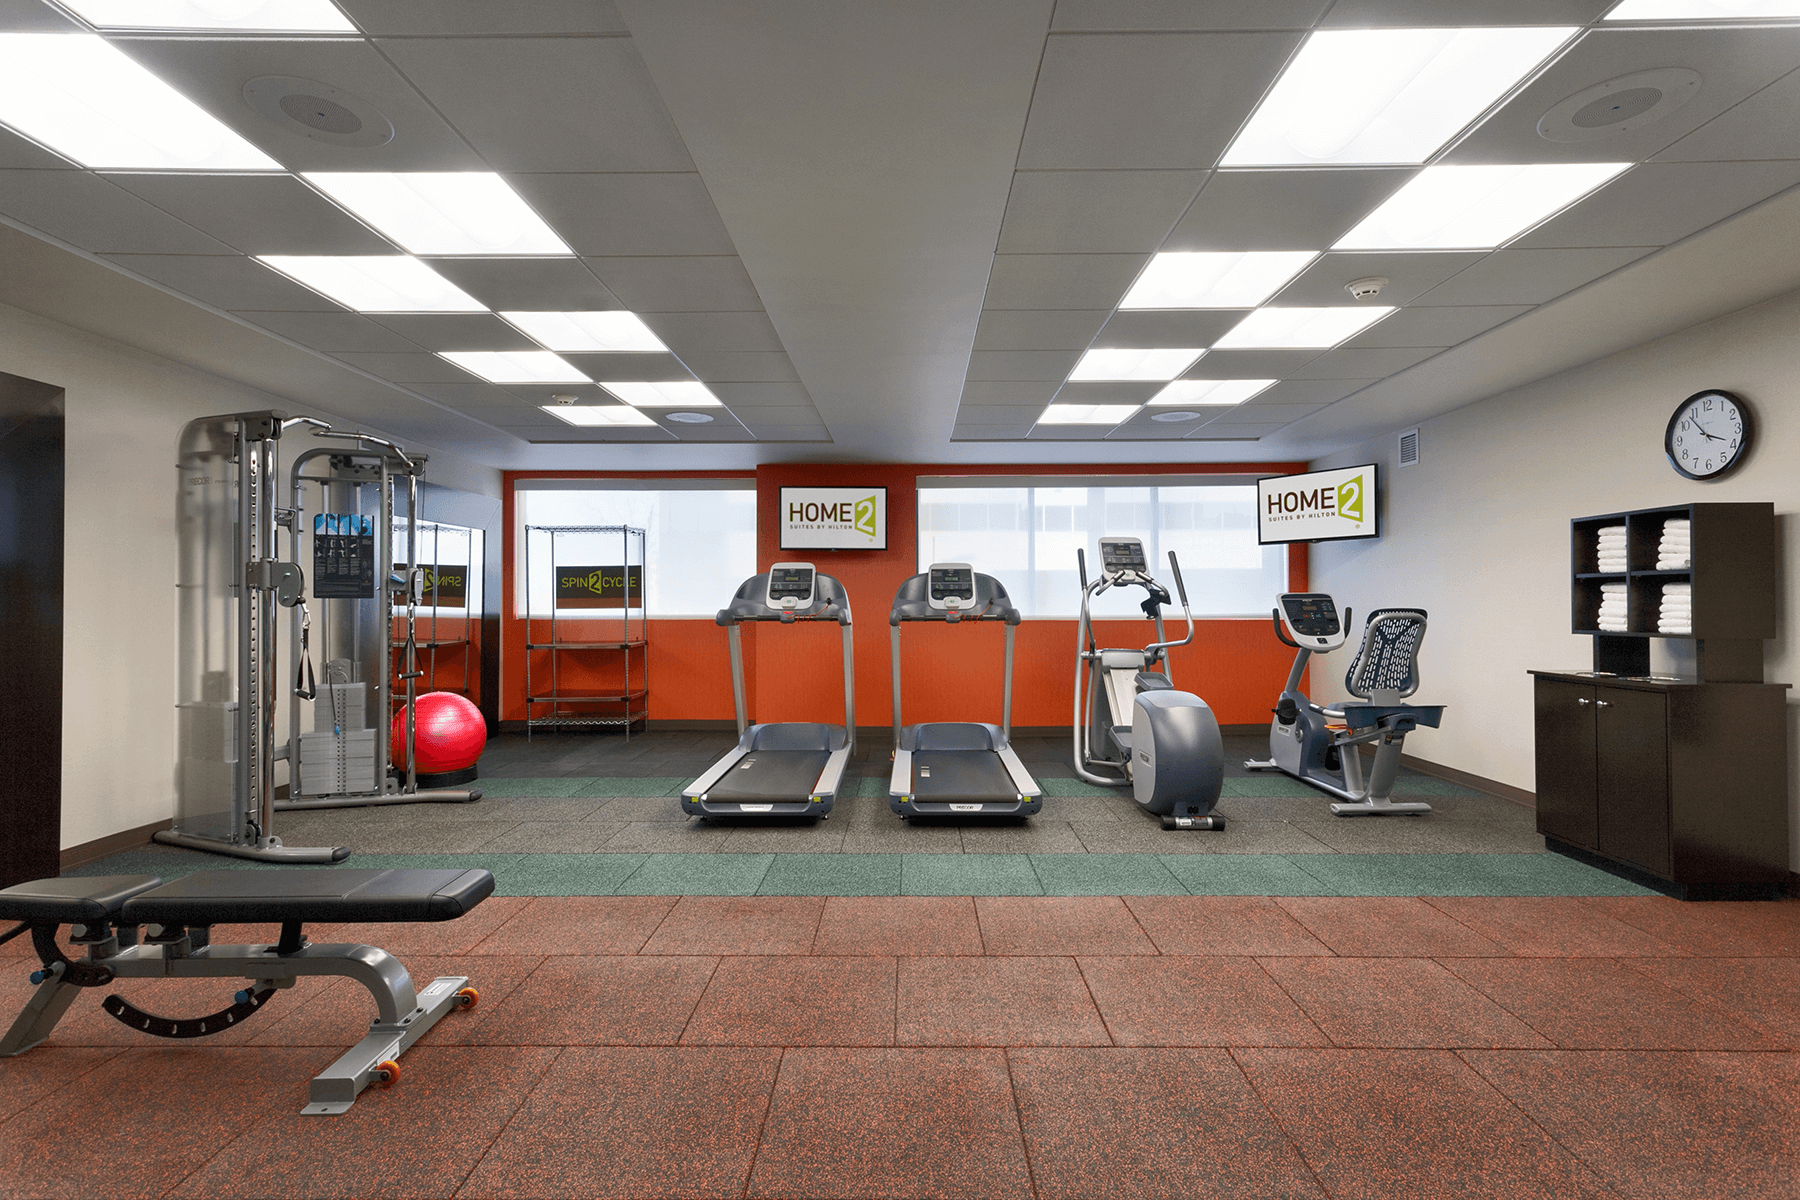  Home 2 Suites - Spin2 Cycle&nbsp;- Fitness room interior 